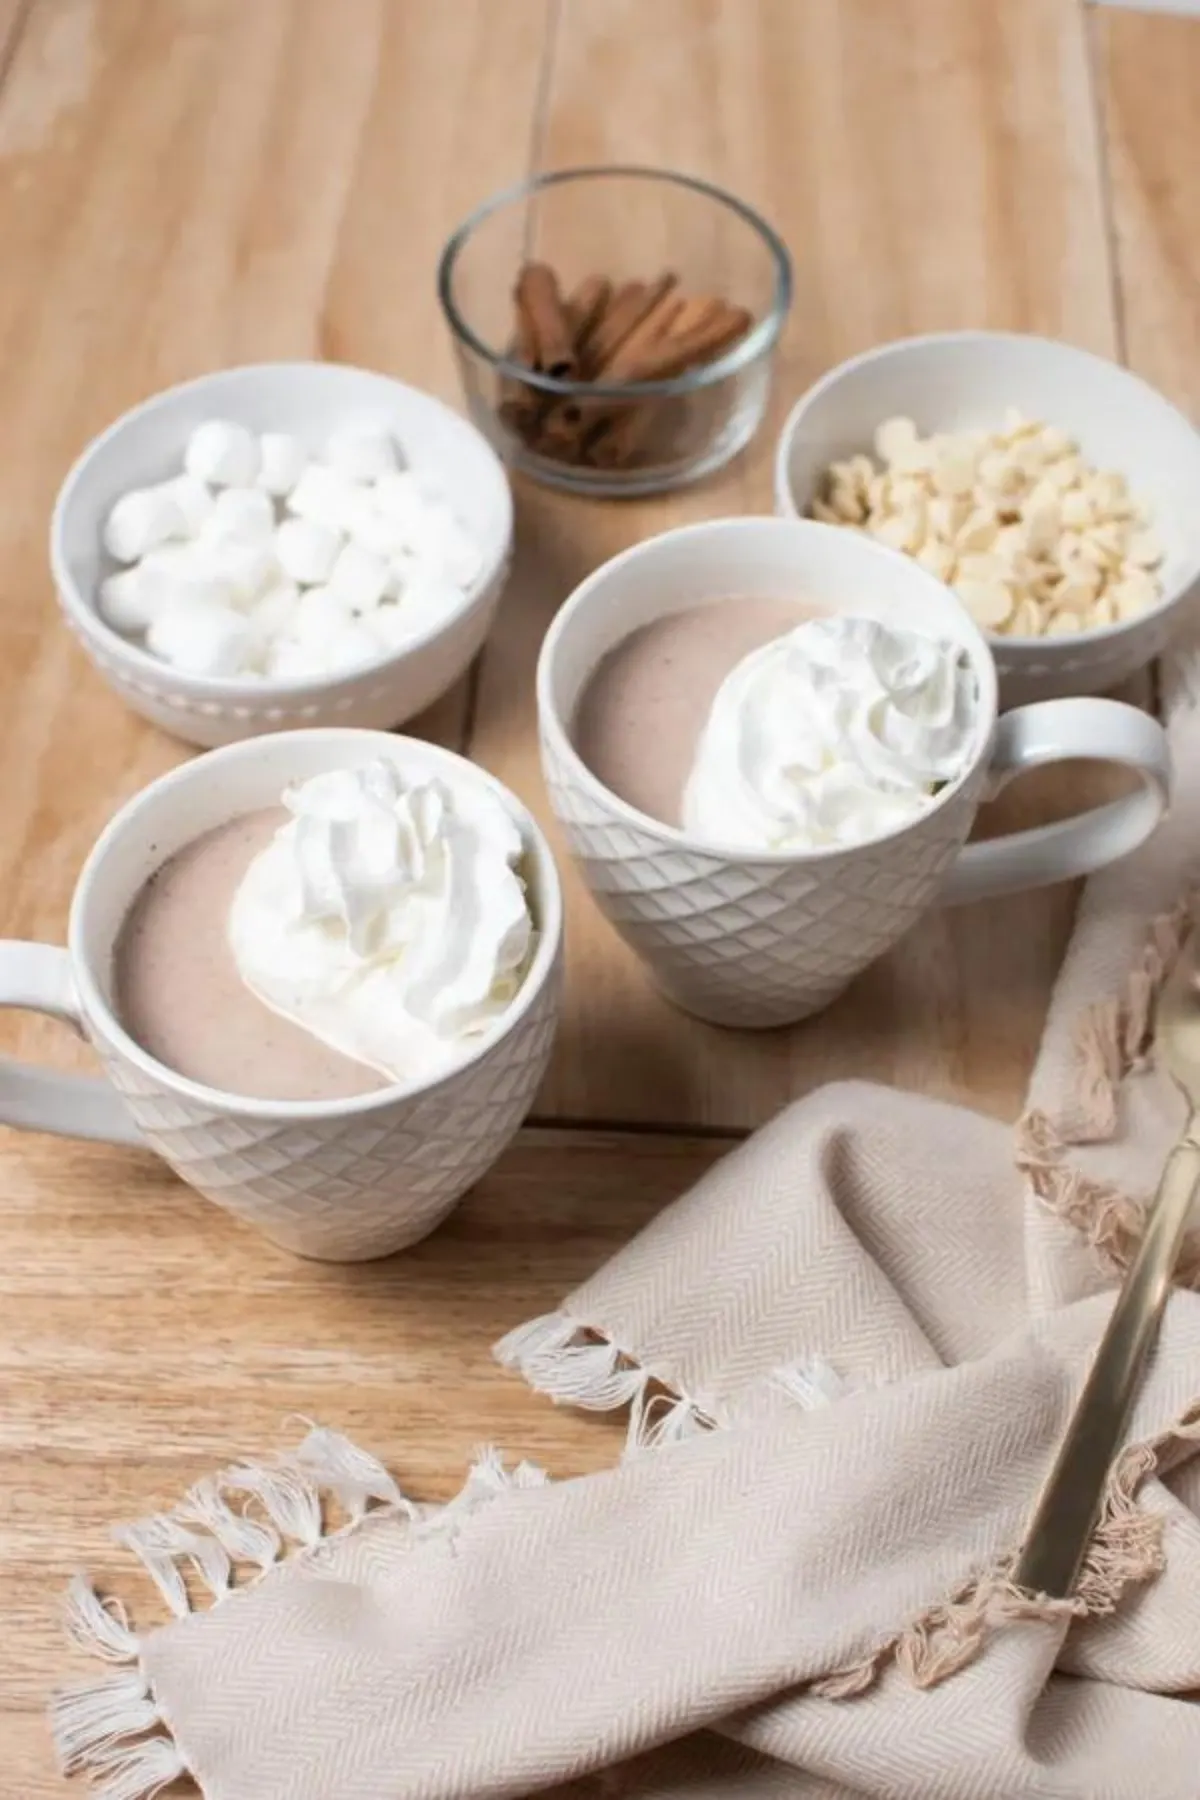 Mugs filled with white hot chocolate next to bowls of chocolate, marshmallow and cinnamon.